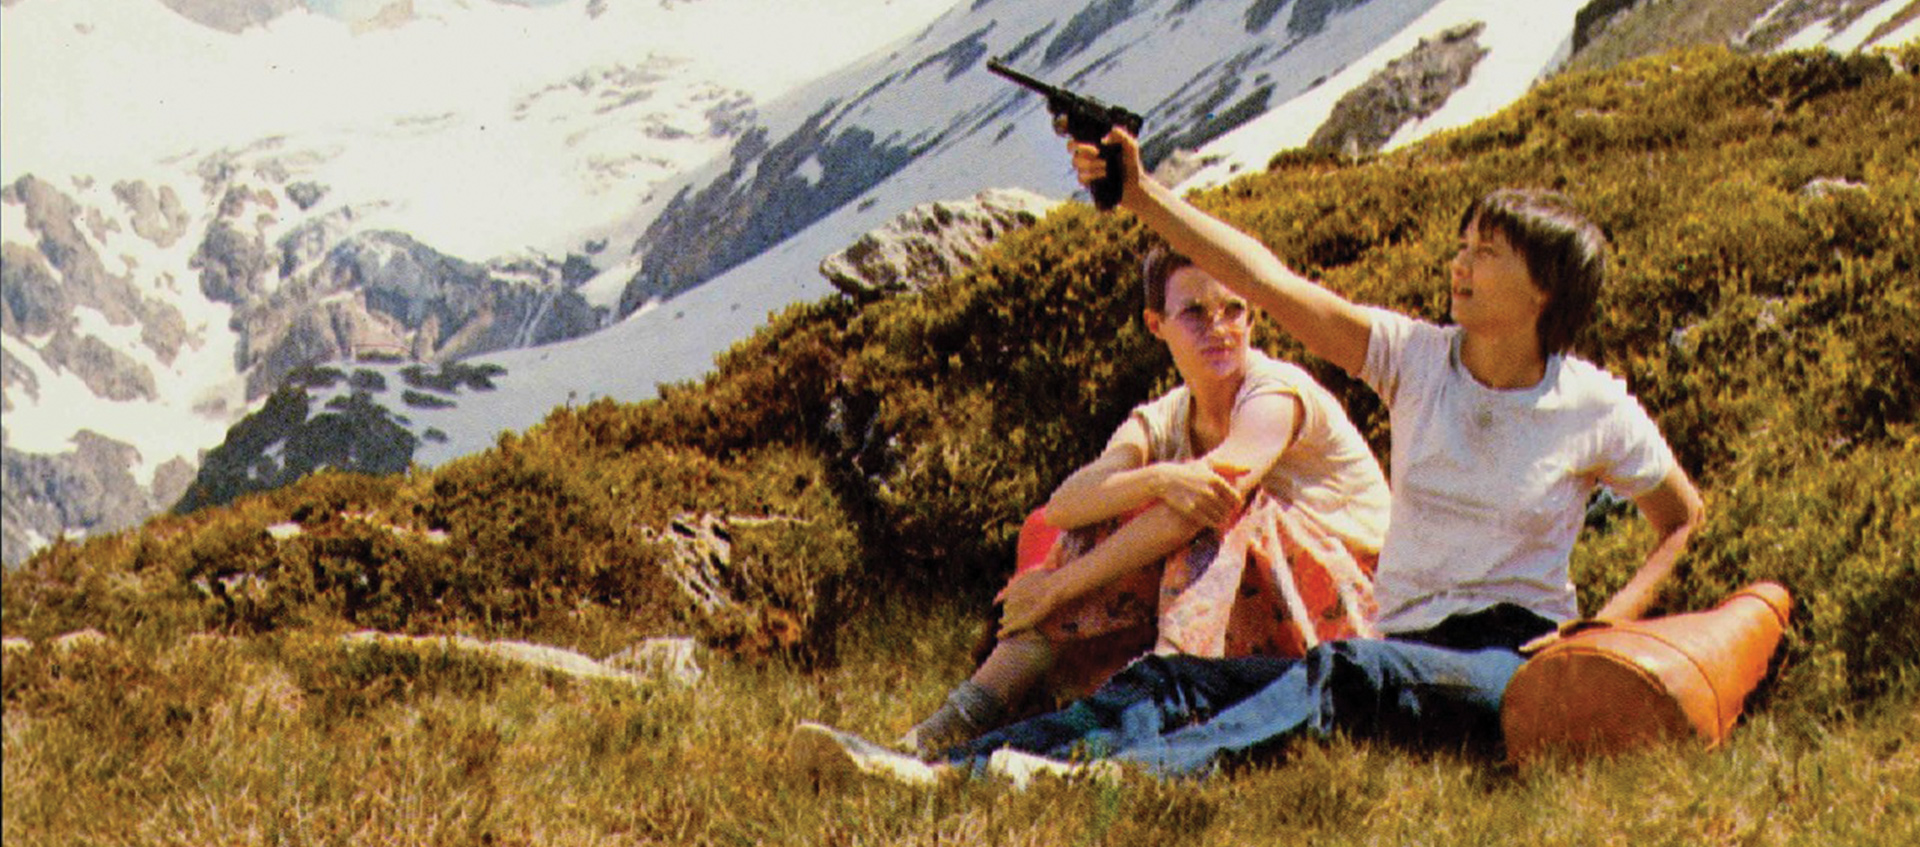 Two woman sit on mountainside, one holds a gun